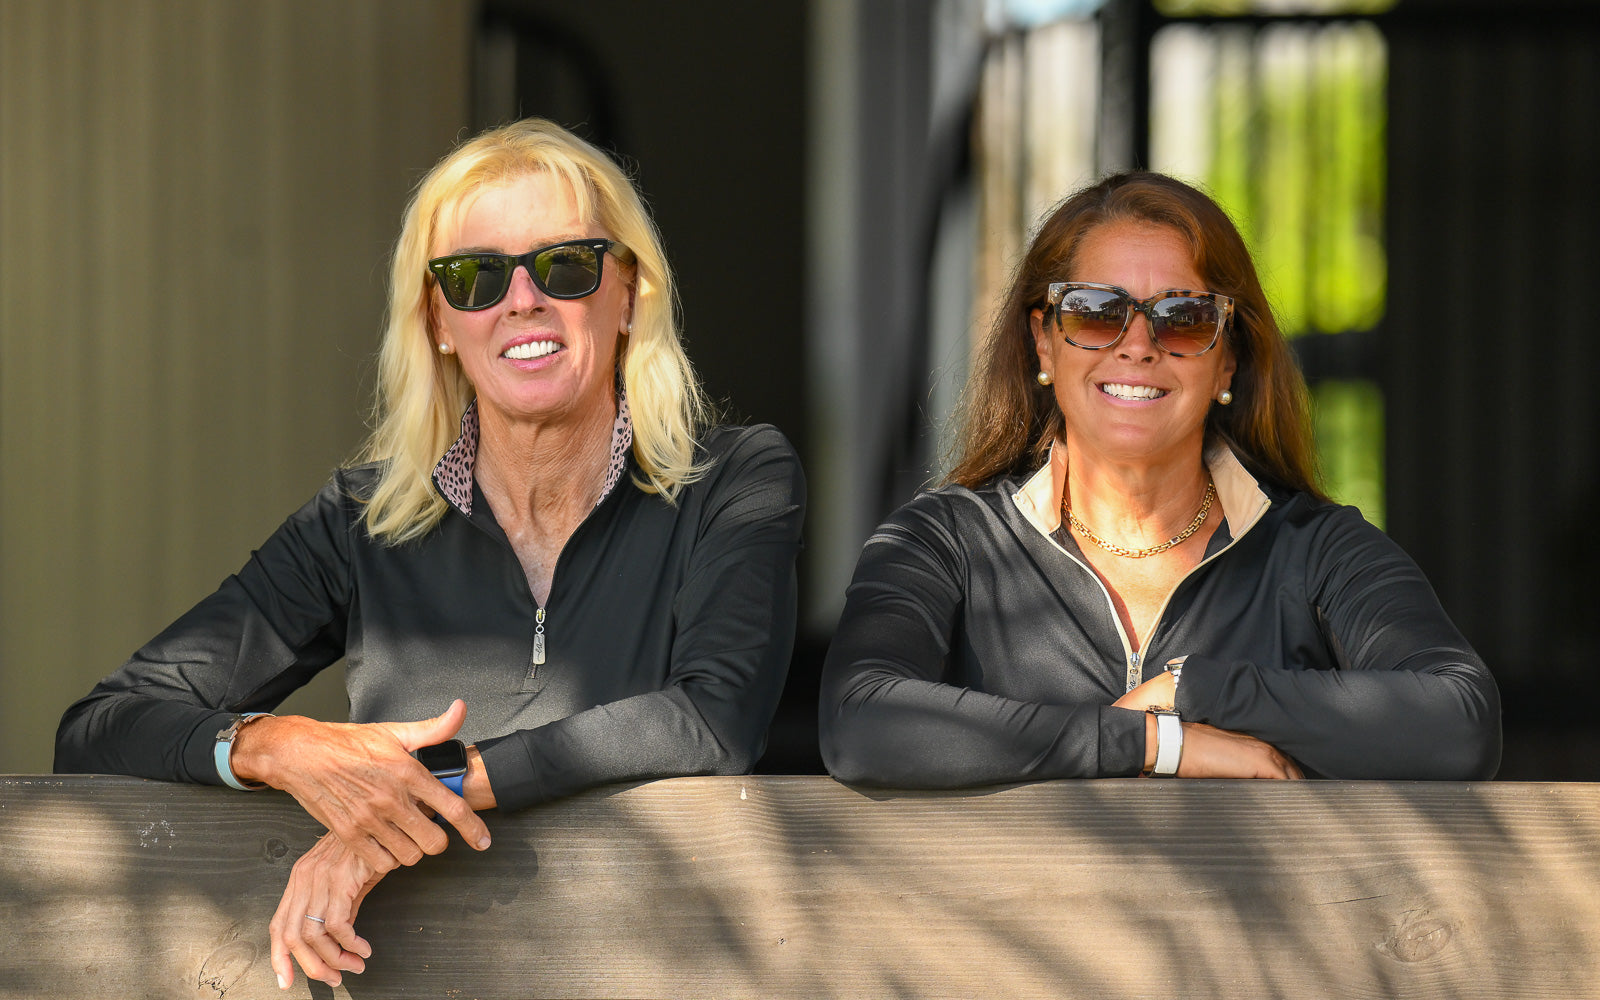 Two female equestrians striking a pose in their EA Limited Inc.'s UPF 50+ sun shirts, designed to protect against harmful sun rays.